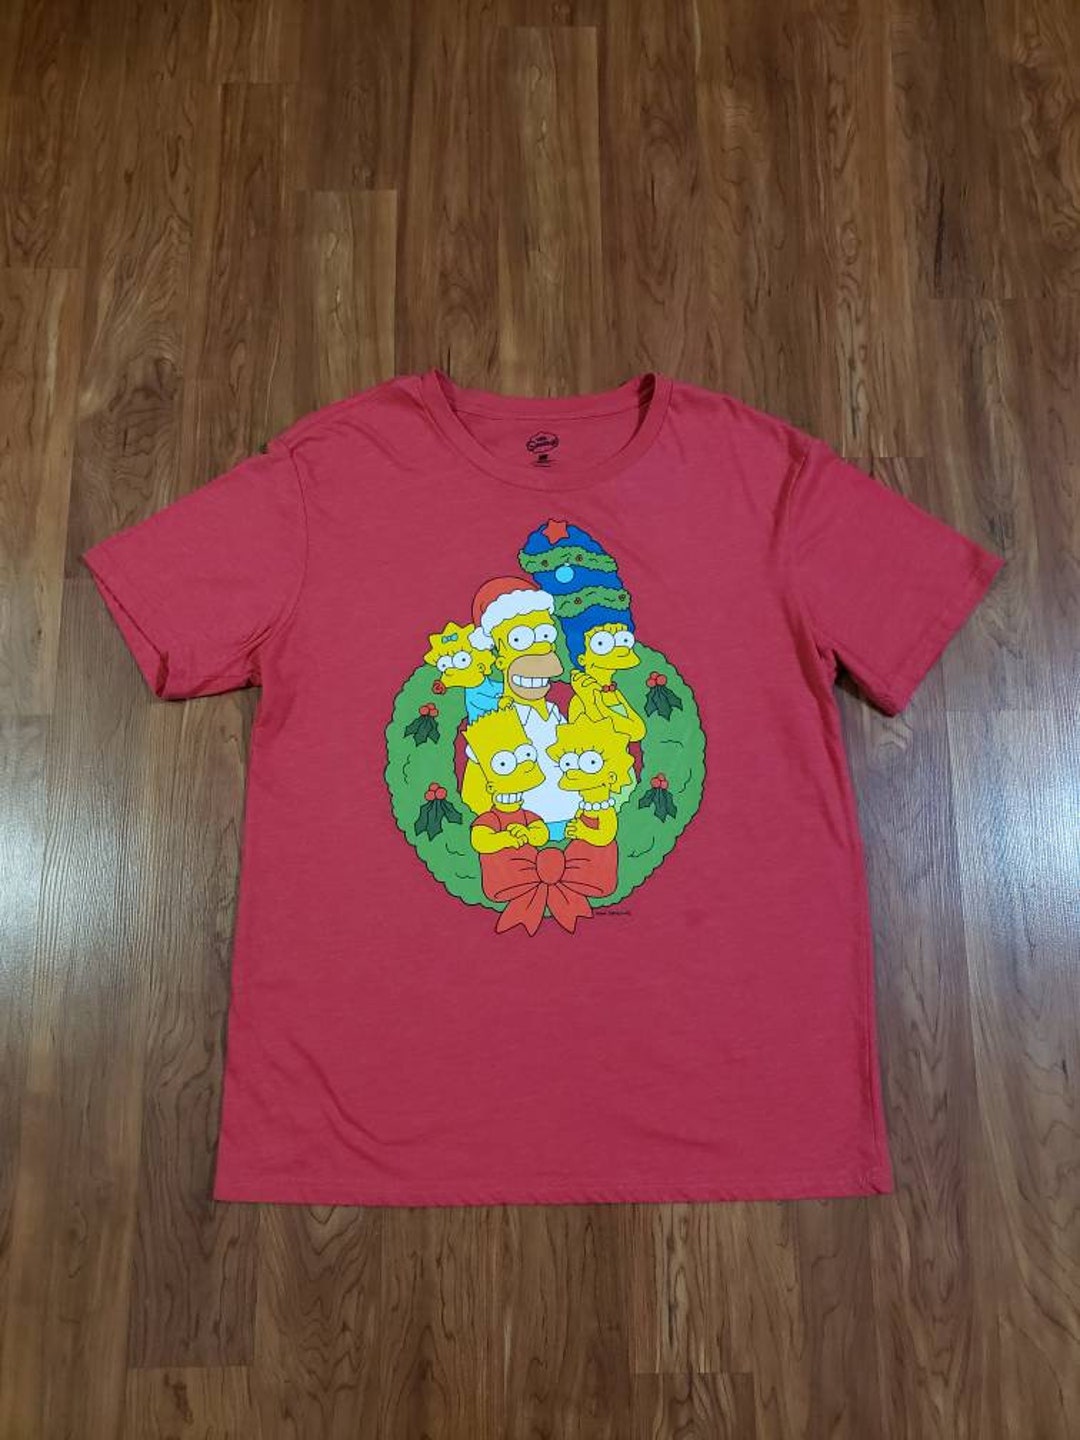 The Simpsons Family Picture Shirt Christmas Wreath Homer Marge Bart Lisa  Maggie Red Tshirt by Matt Groening Size Large Official Merch - Etsy | T-Shirts